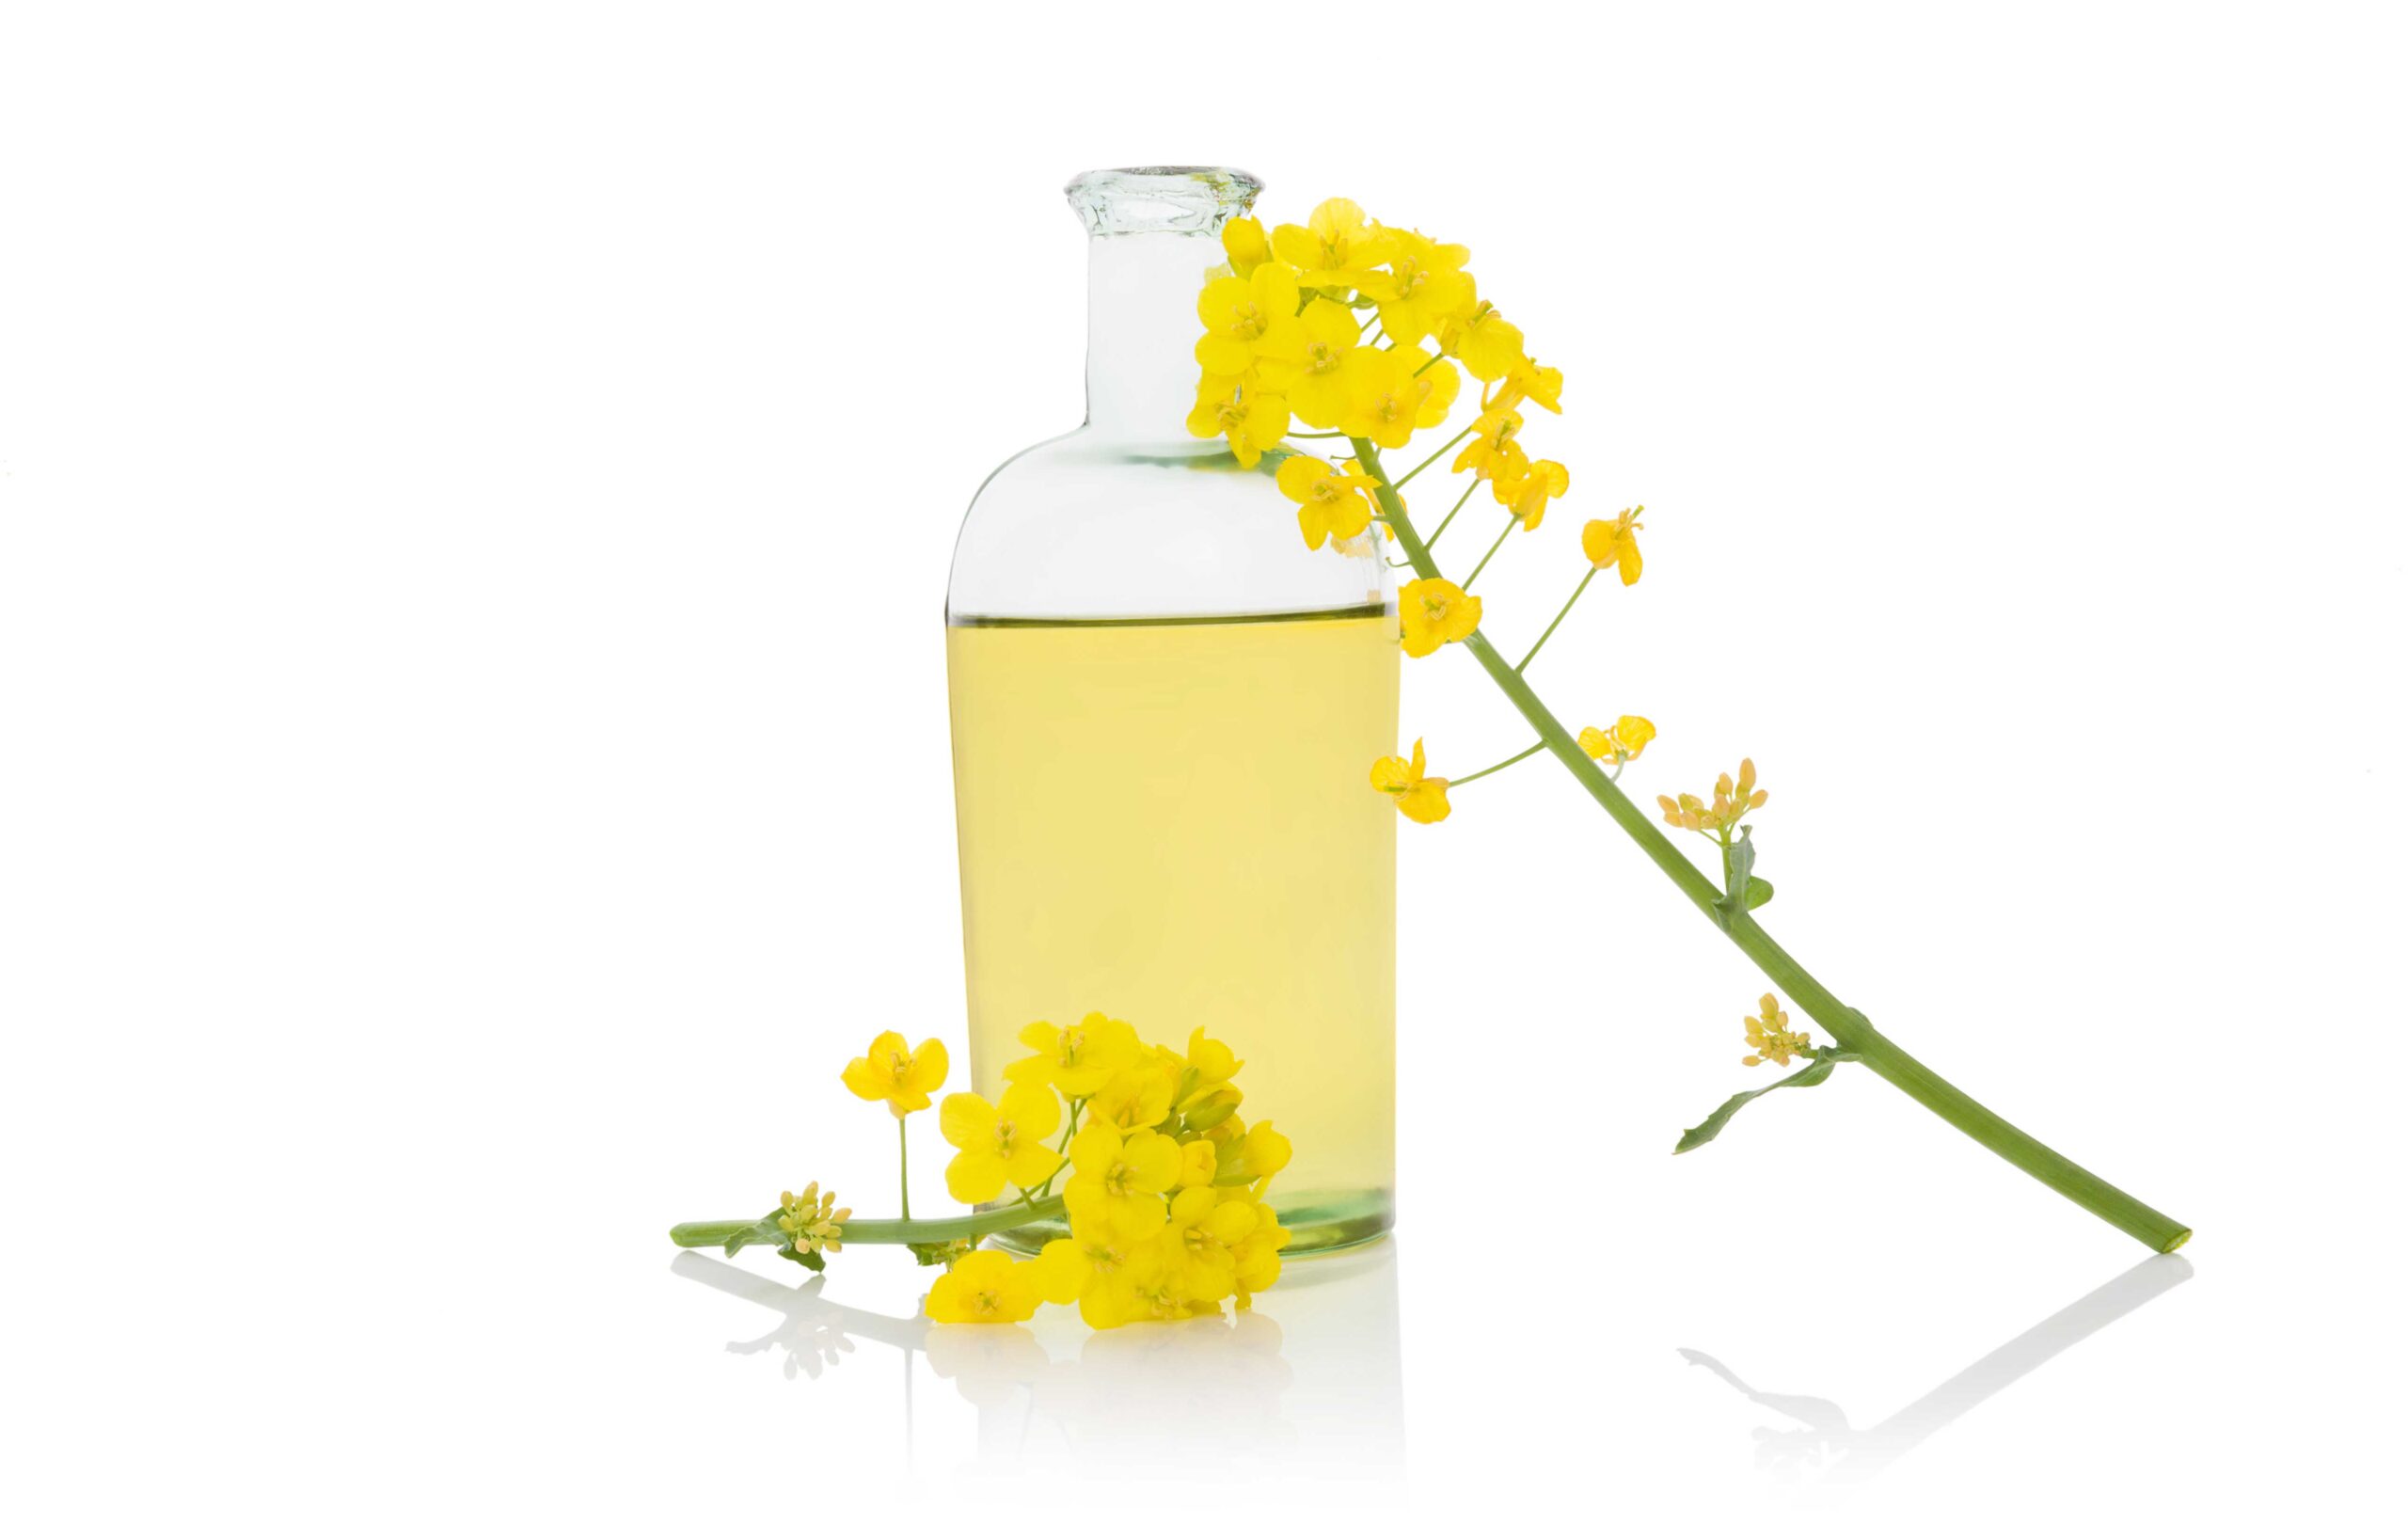 Jar of High Erucic Acid rapeseed oil with two stalks of HEAR on a white background.